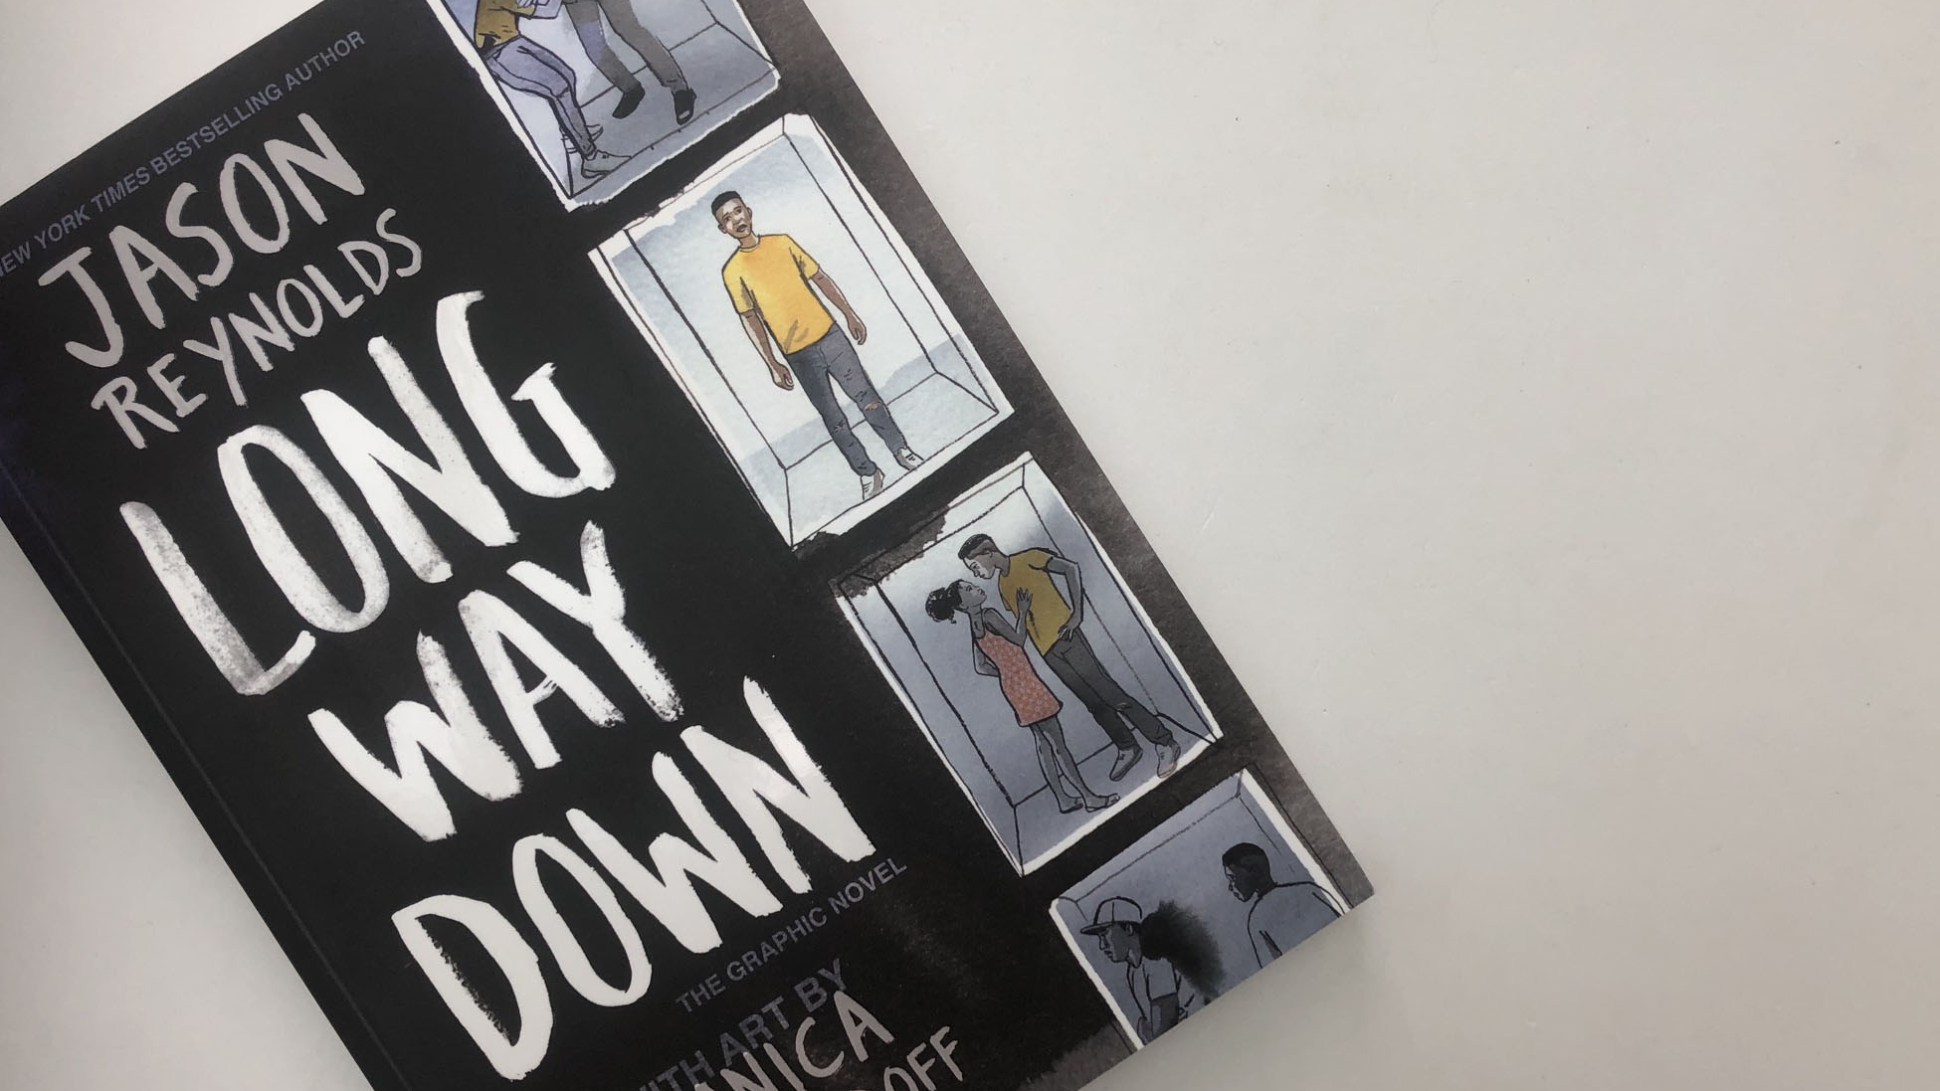 long way down the graphic novel